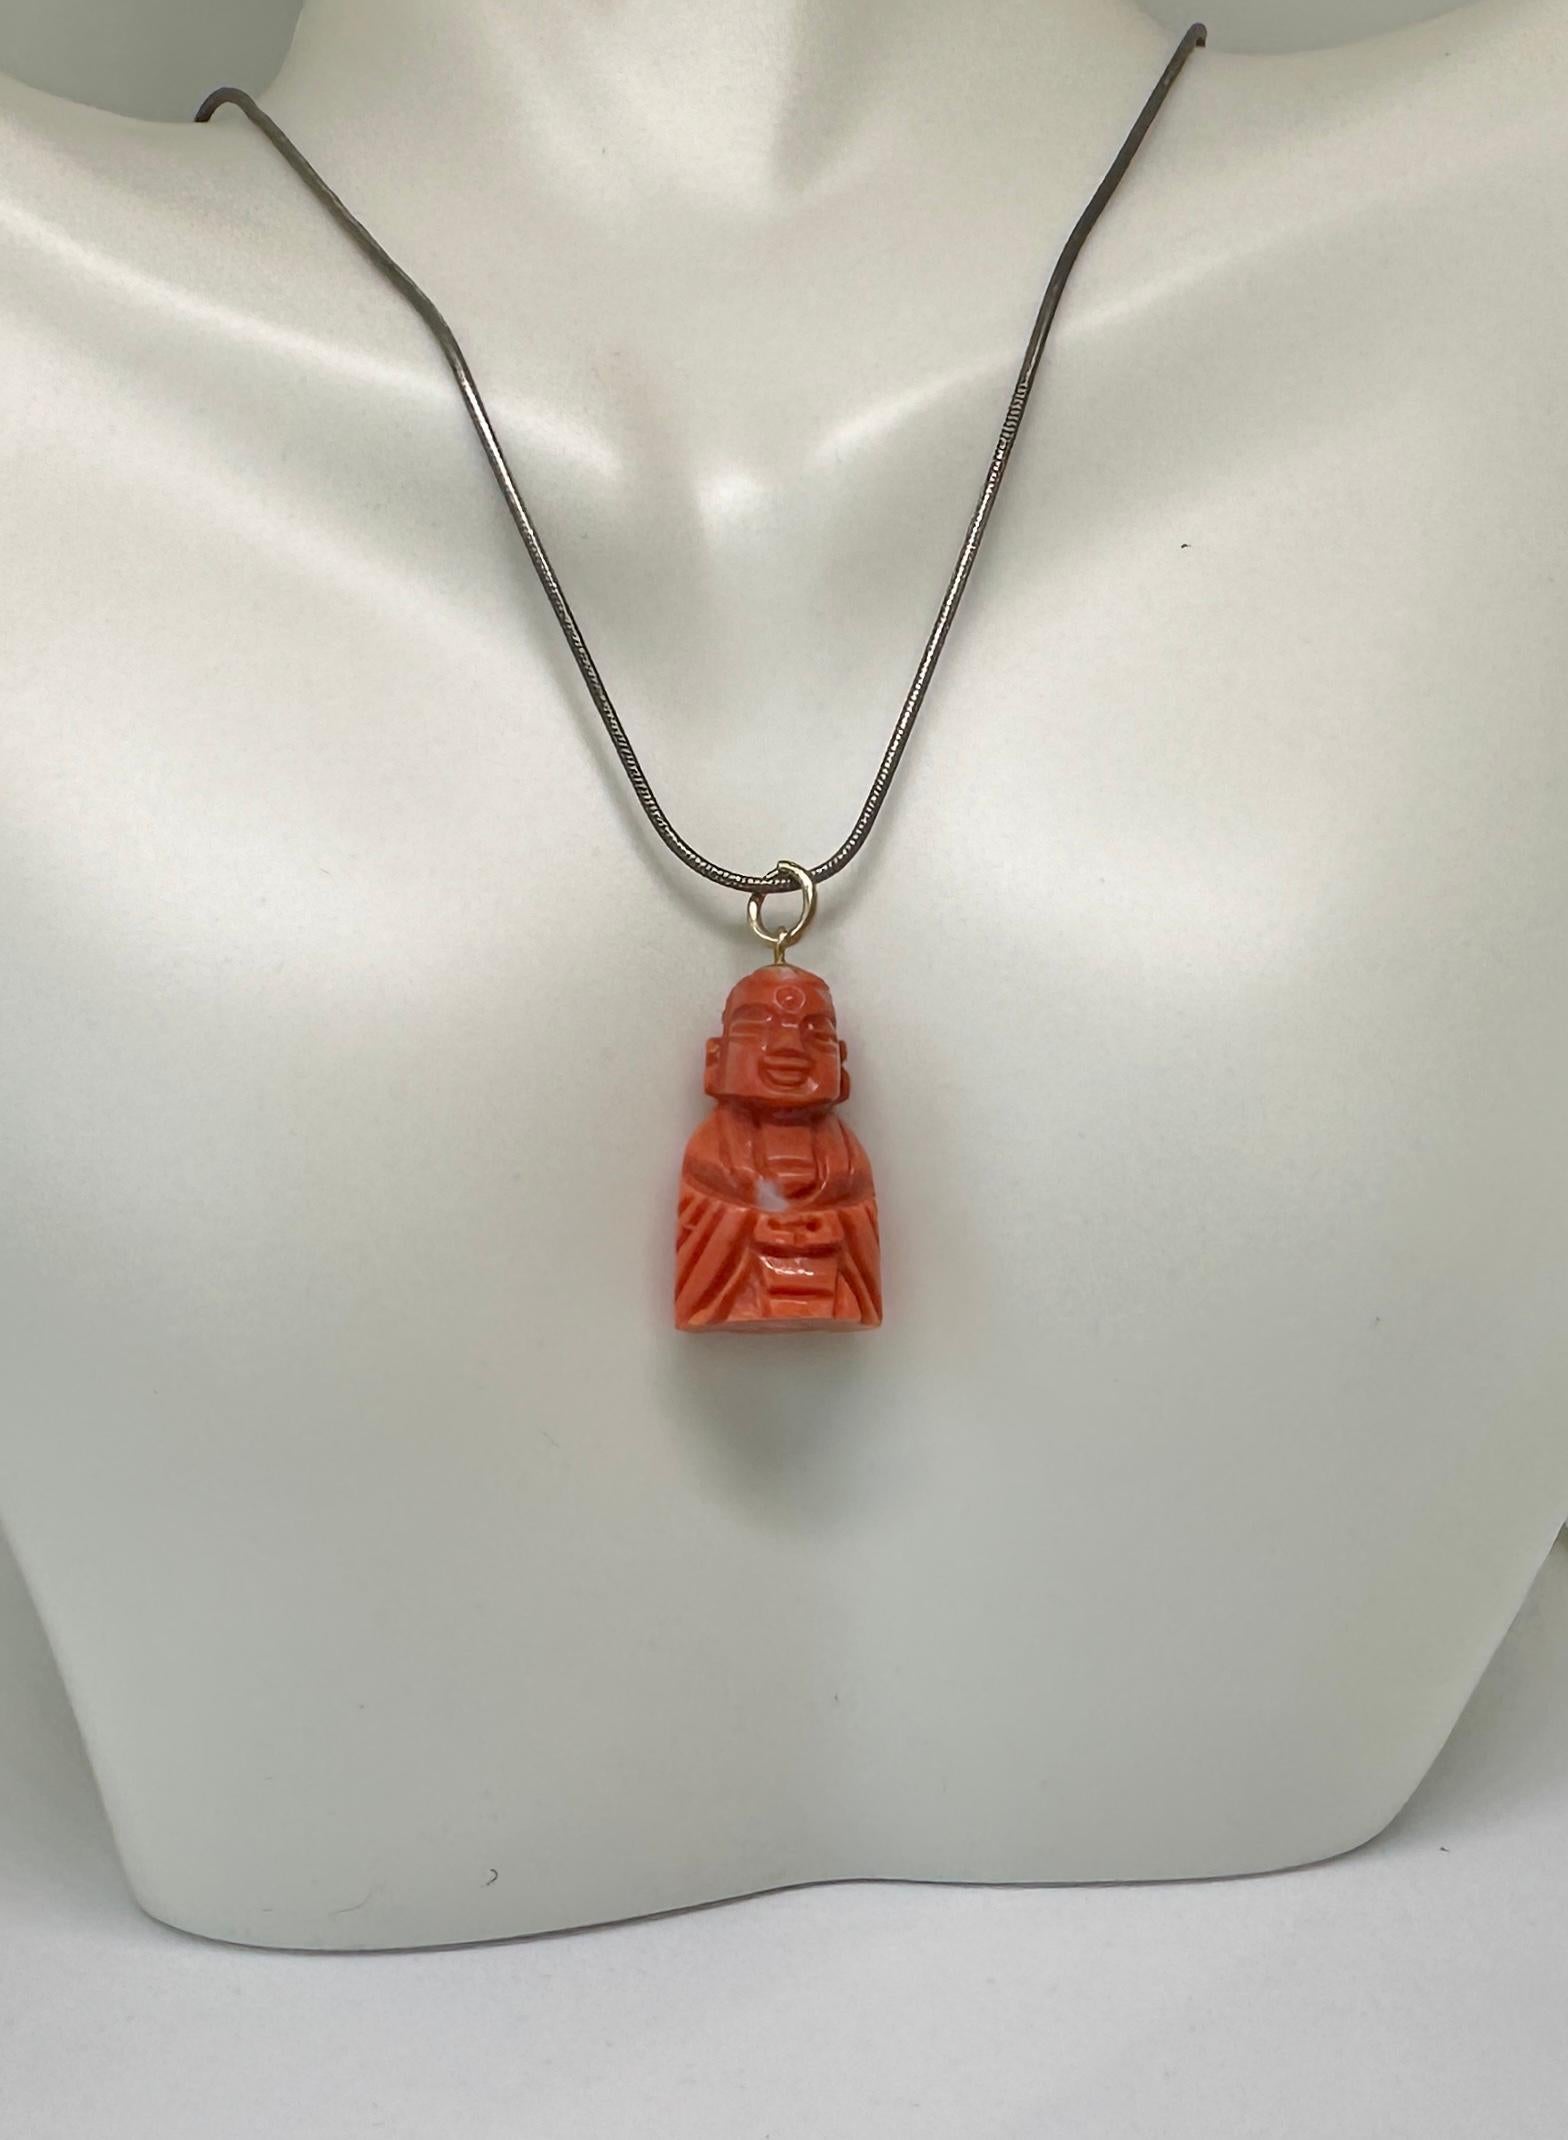 Coral Buddha Pendant Charm Antique Art Deco 14 Karat Gold Necklace Momo Coral In Excellent Condition For Sale In New York, NY